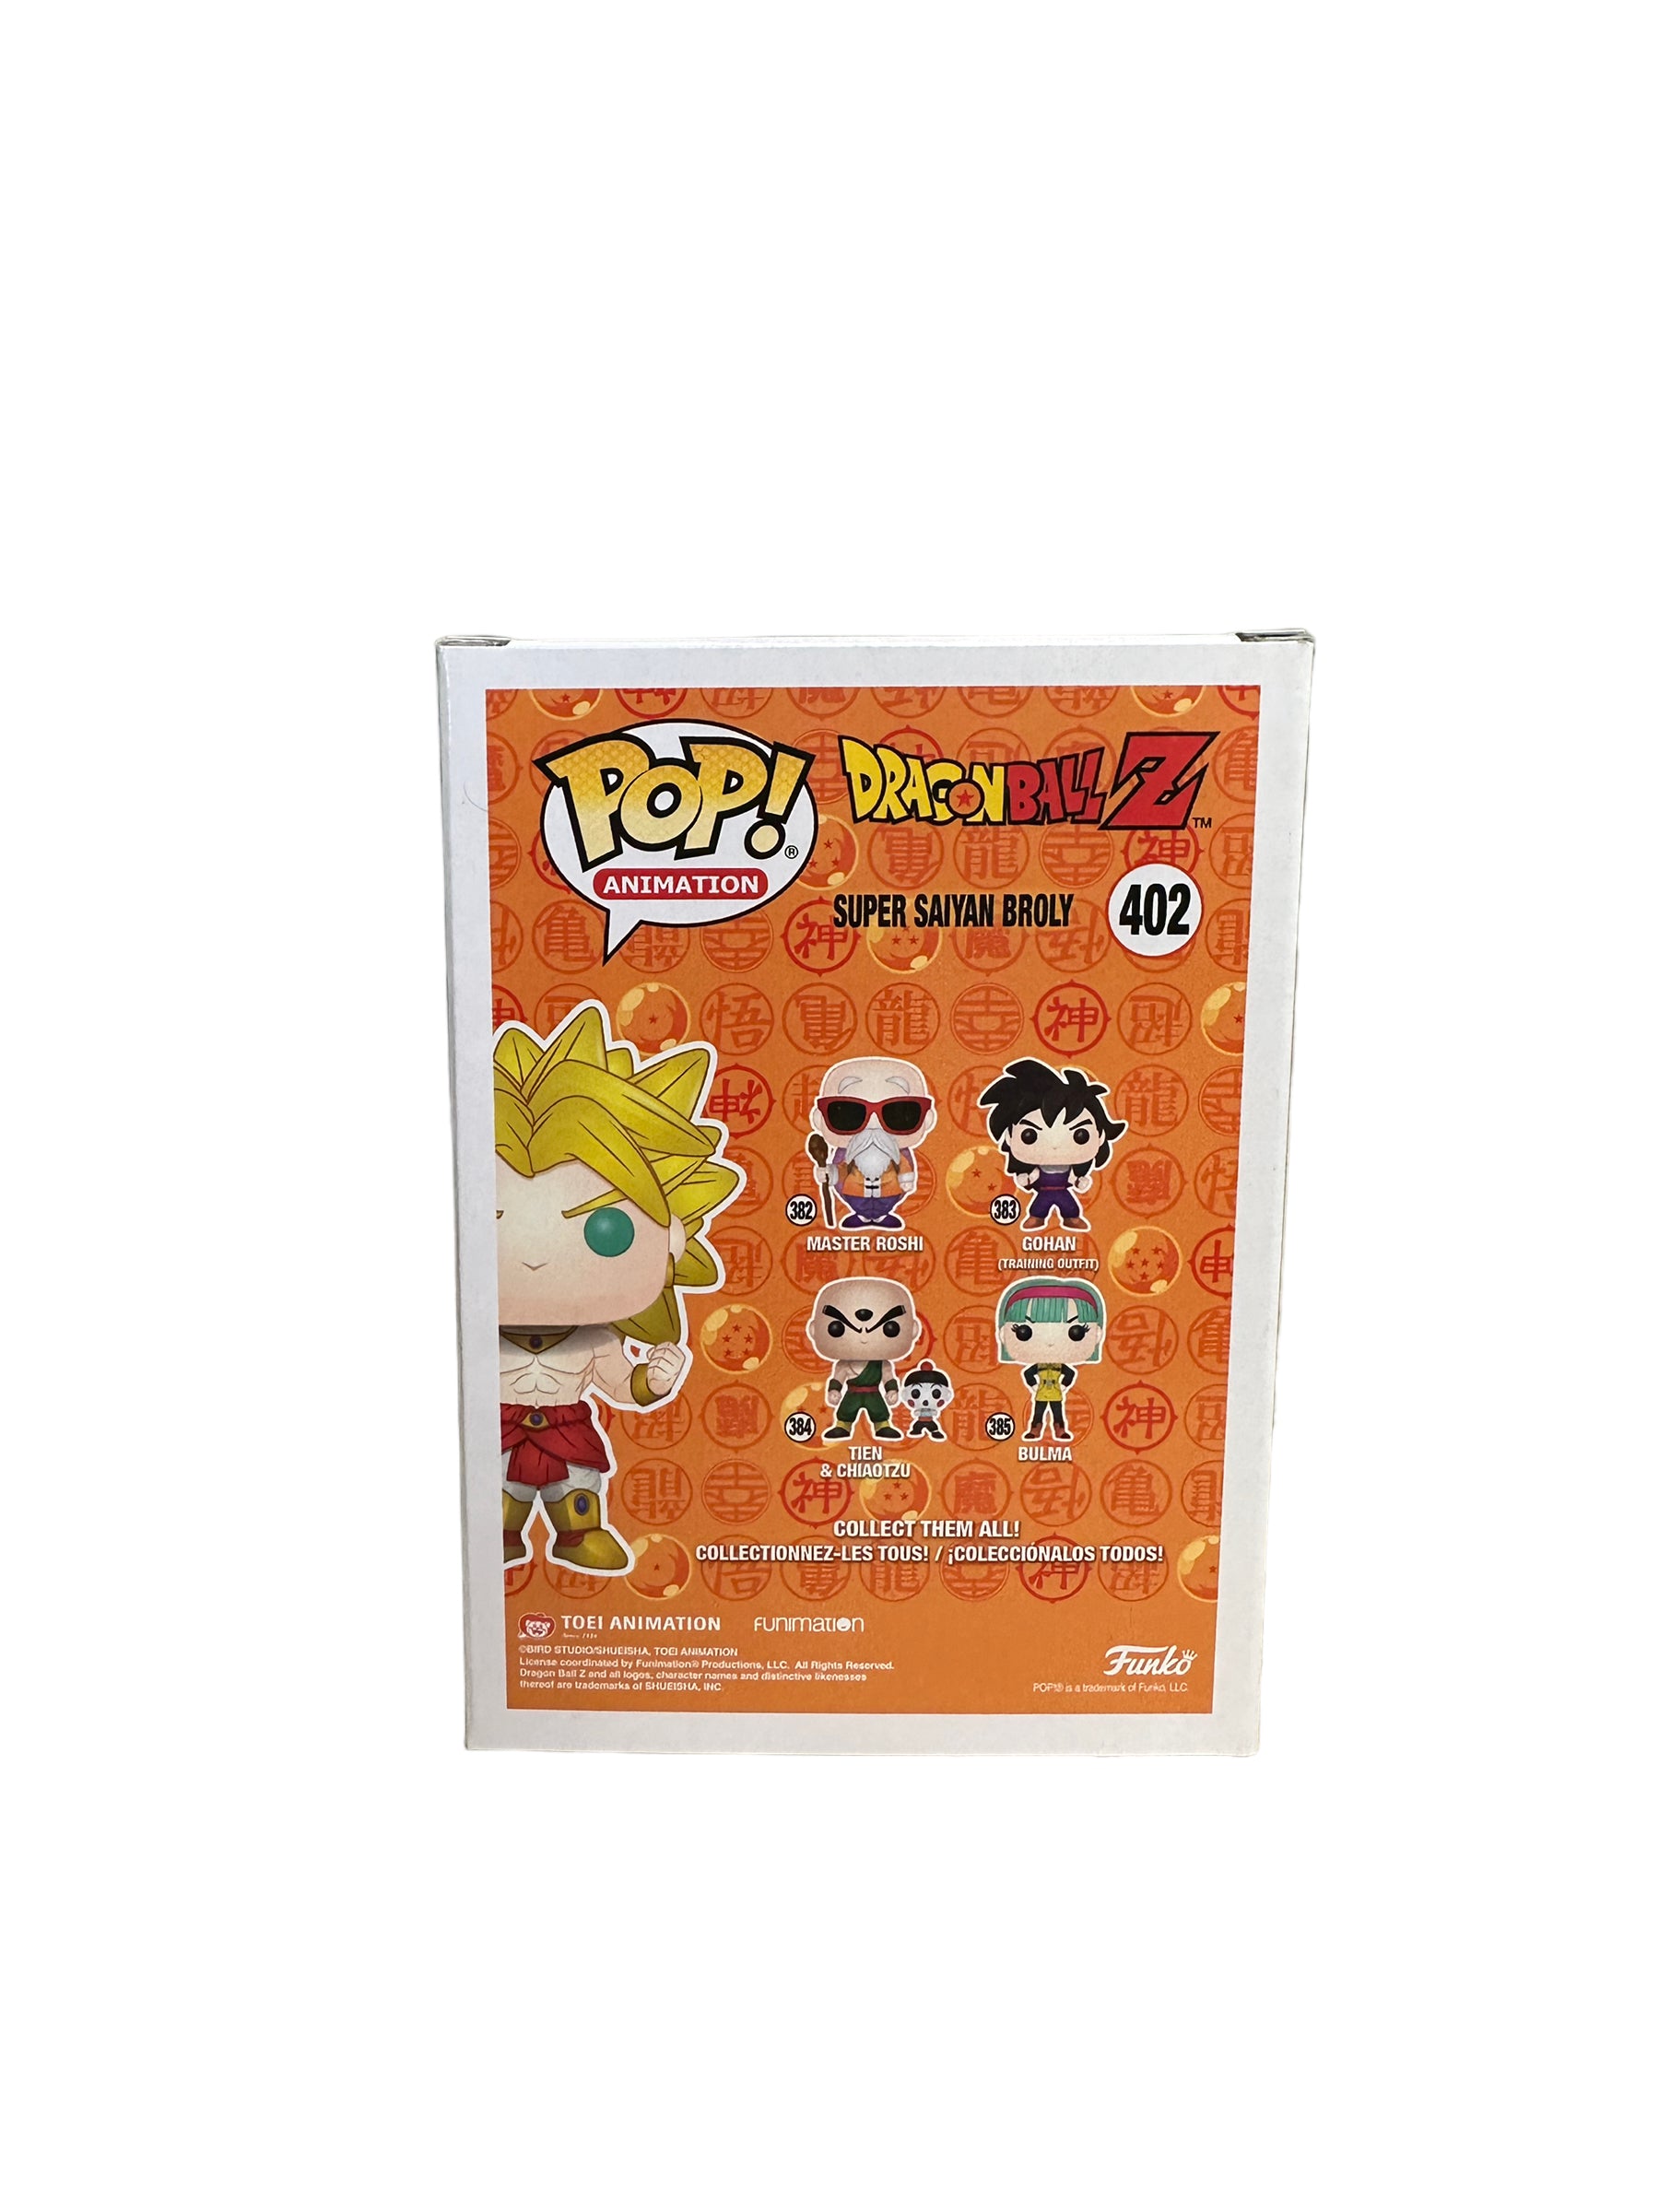 Vic Mignogna Signed Super Saiyan Broly #402 Funko Pop! - Dragon Ball Z - SDCC 2018 Shared Exclusive - Condition 9.5/10 - JSA Authenticated